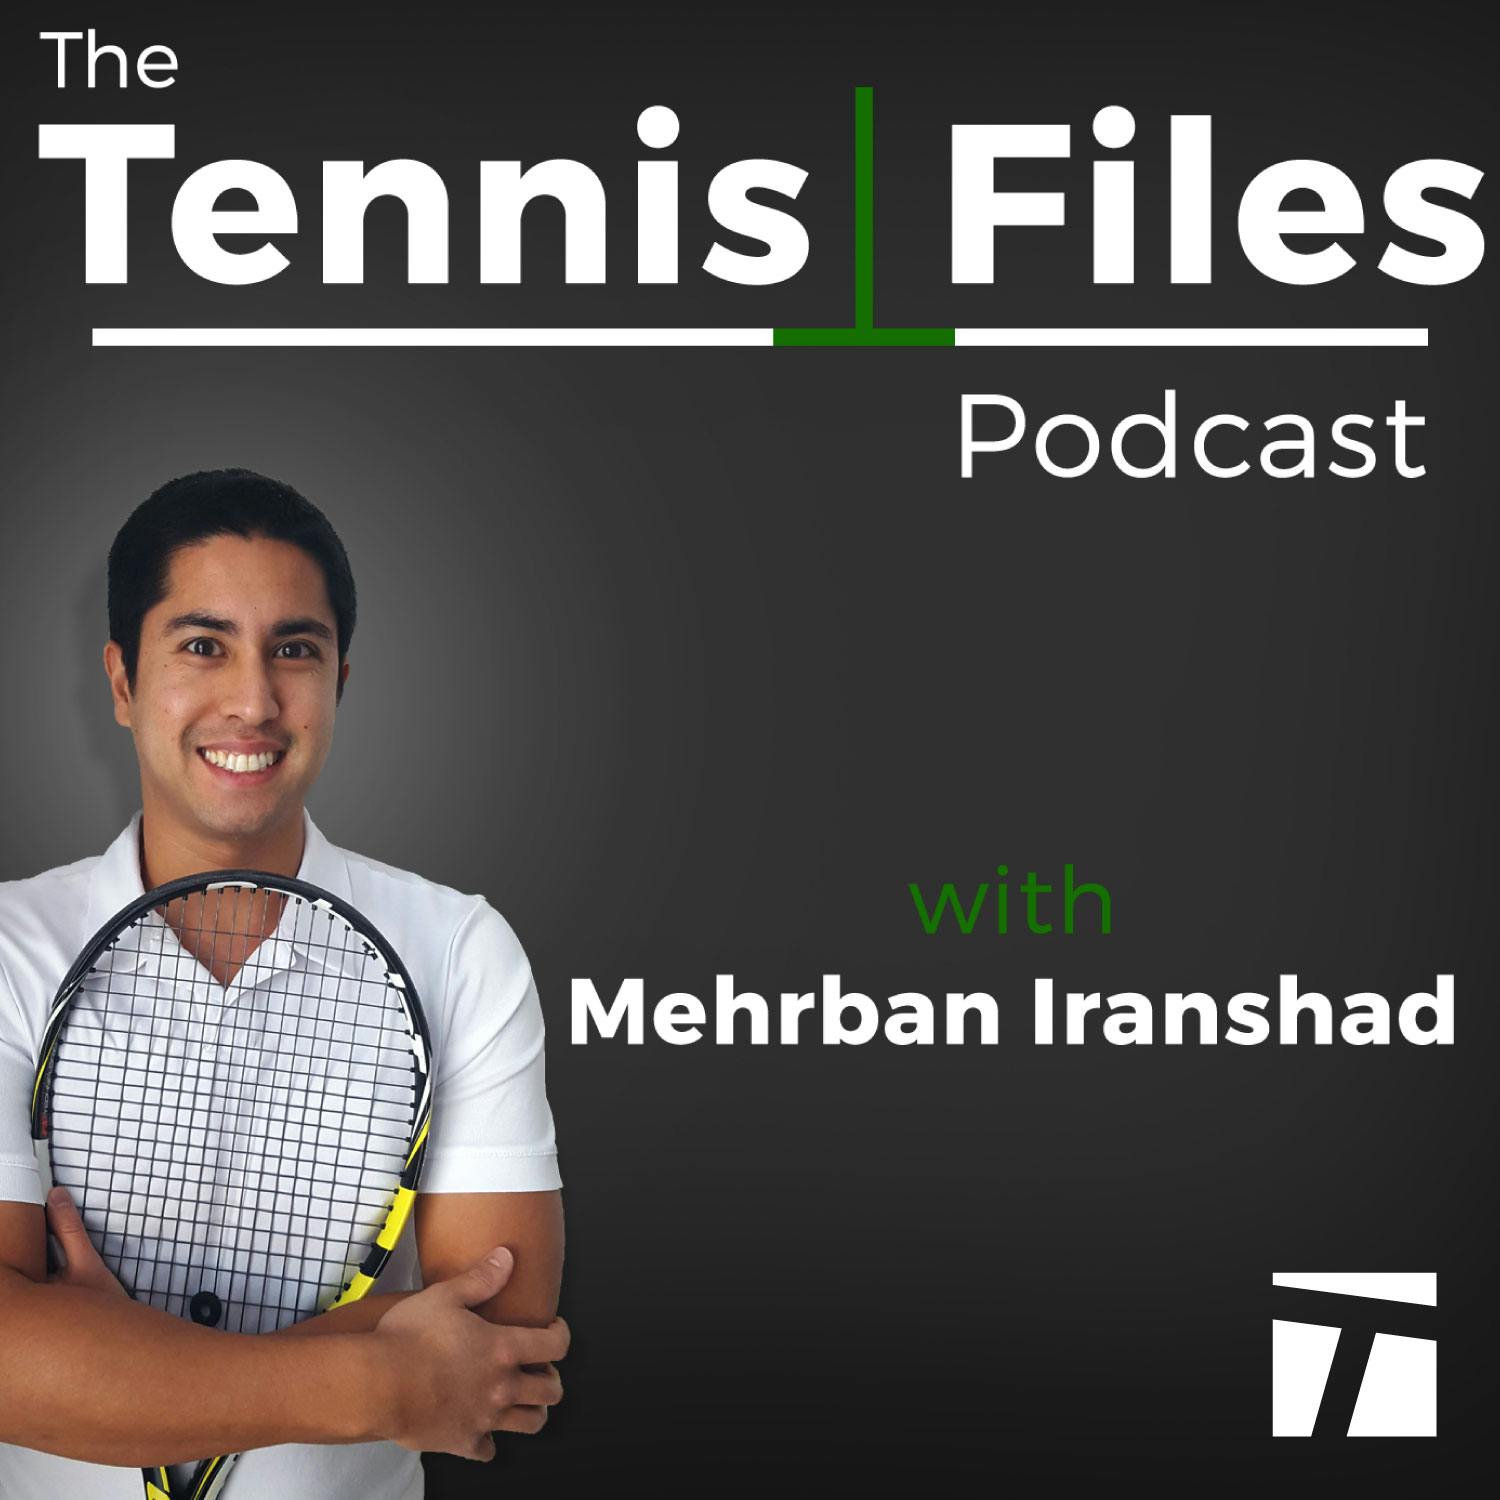 TFP 350: 5 Keys to an Explosive Forehand – From the 2021 archives